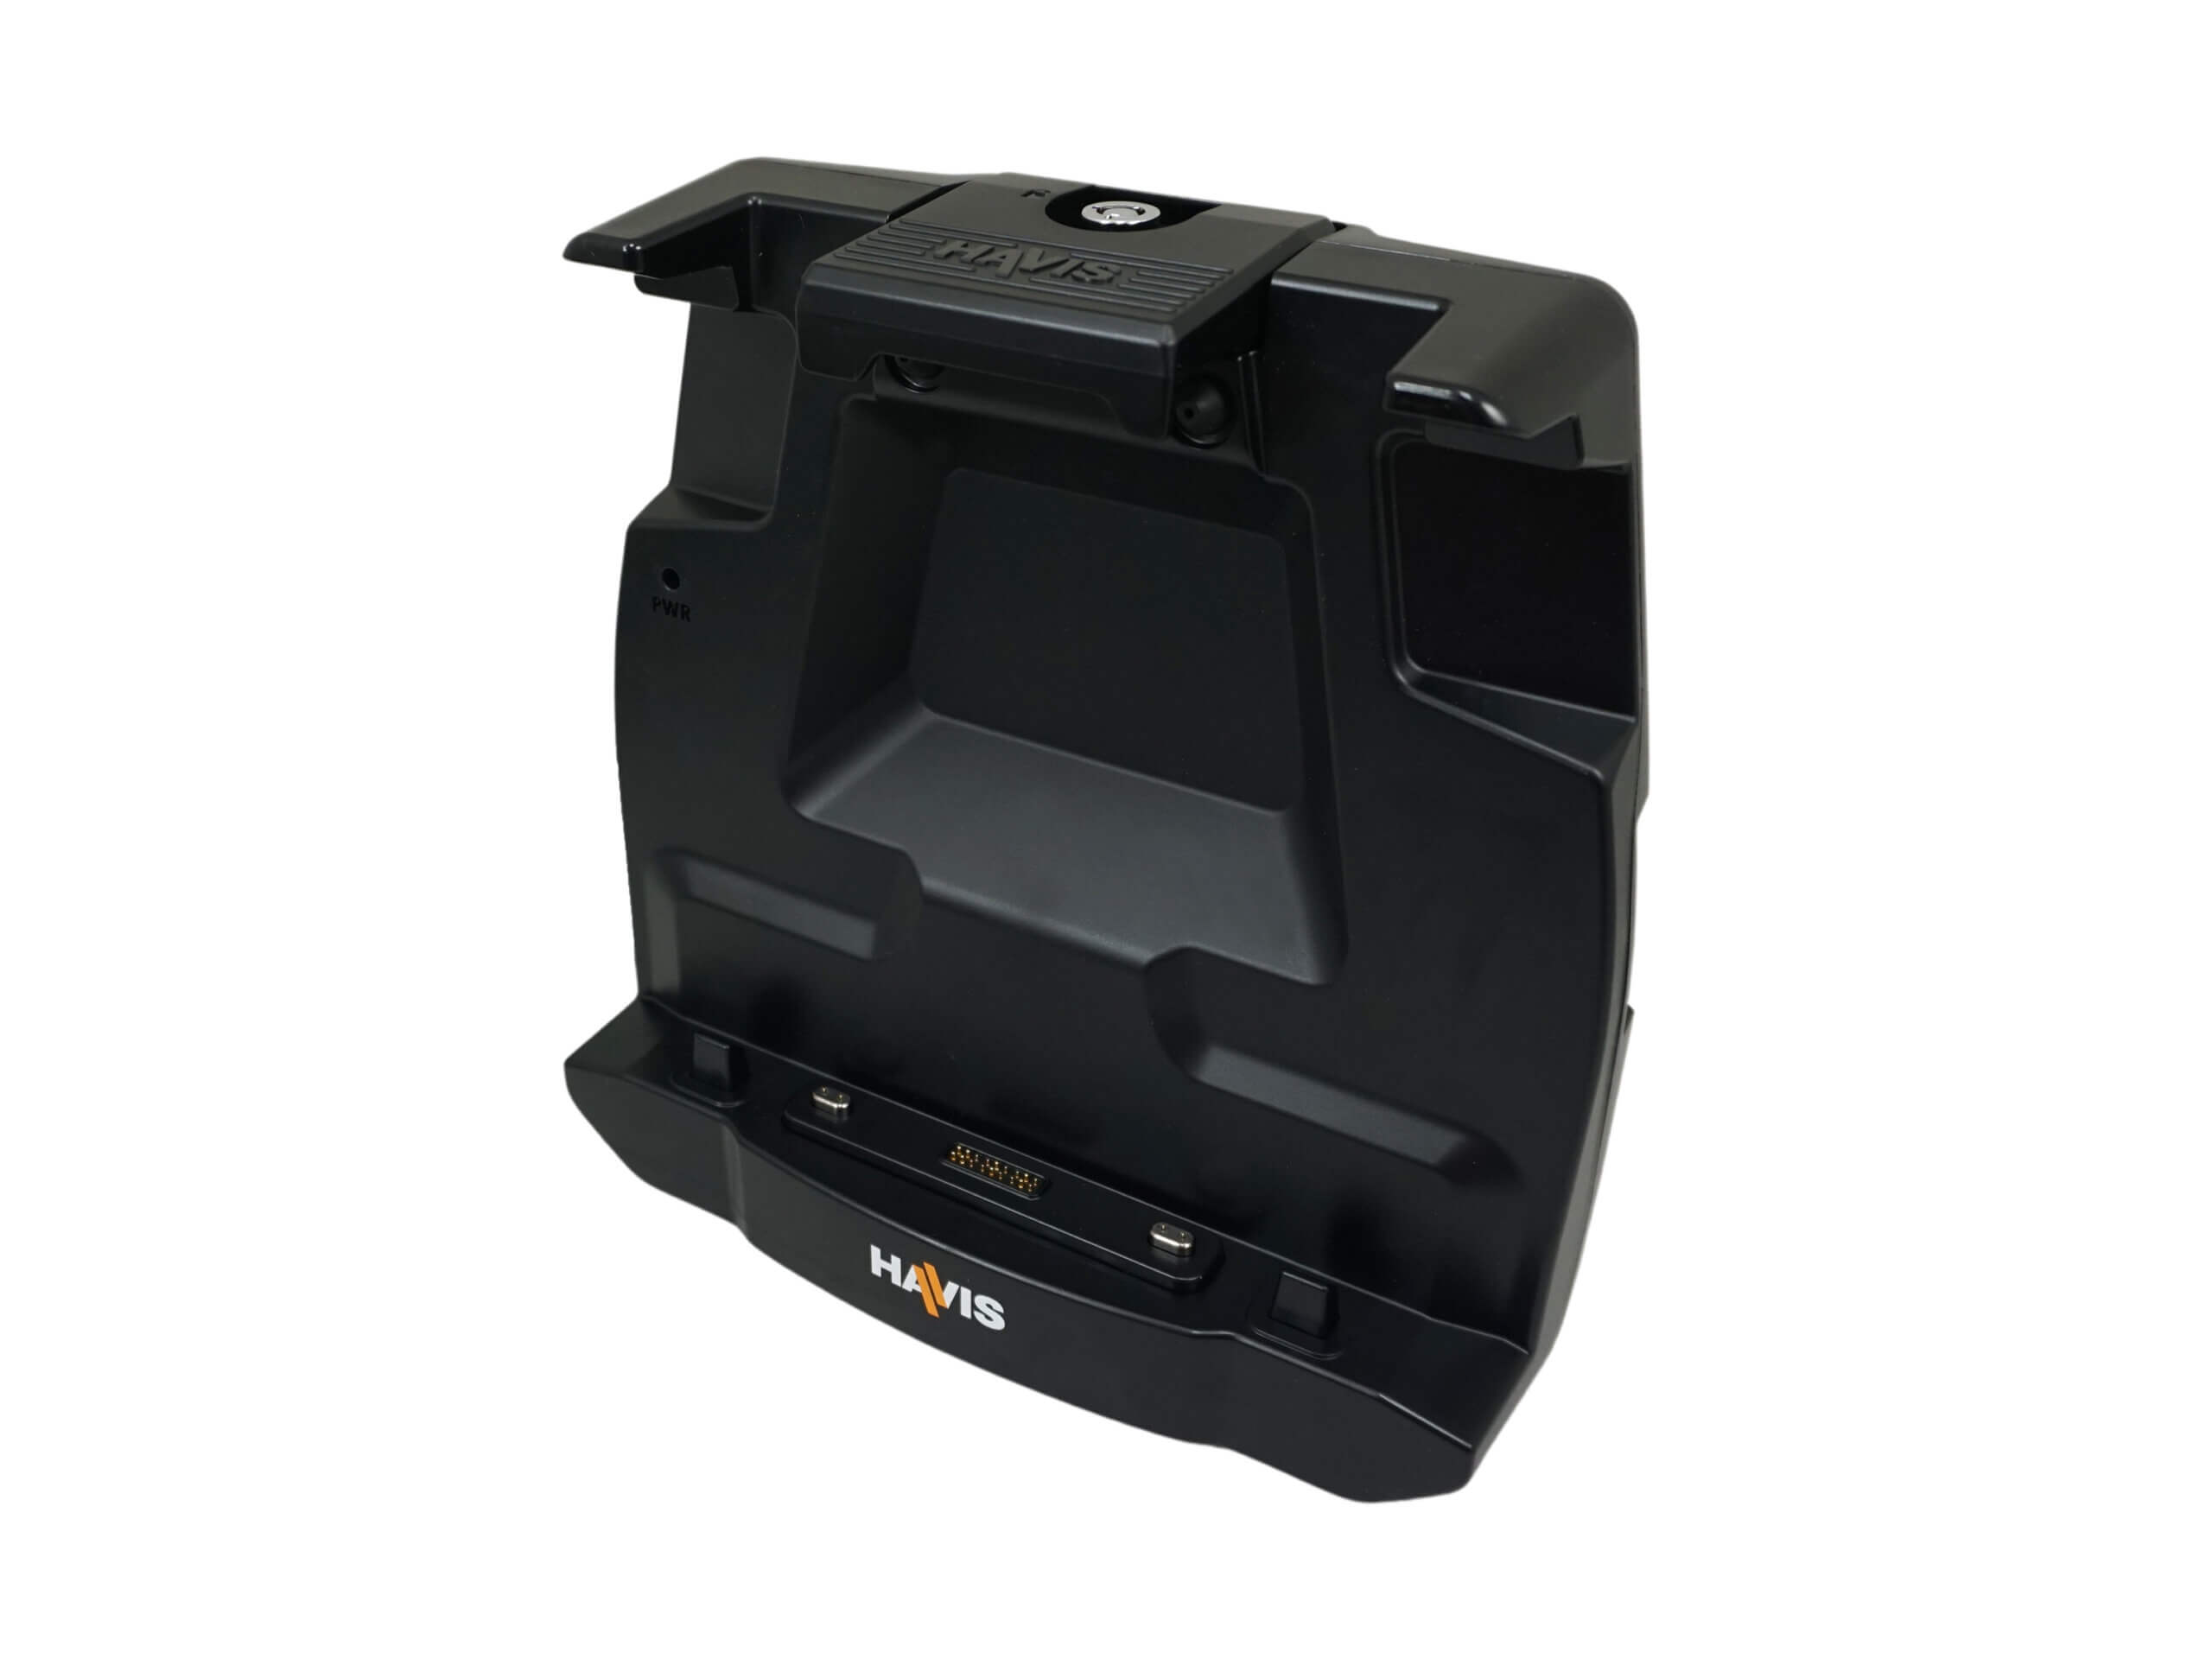 Docking Station for Dell’s 7230 Tablet with Advanced Port Replication & Quad Pass-Thru Antenna Connection